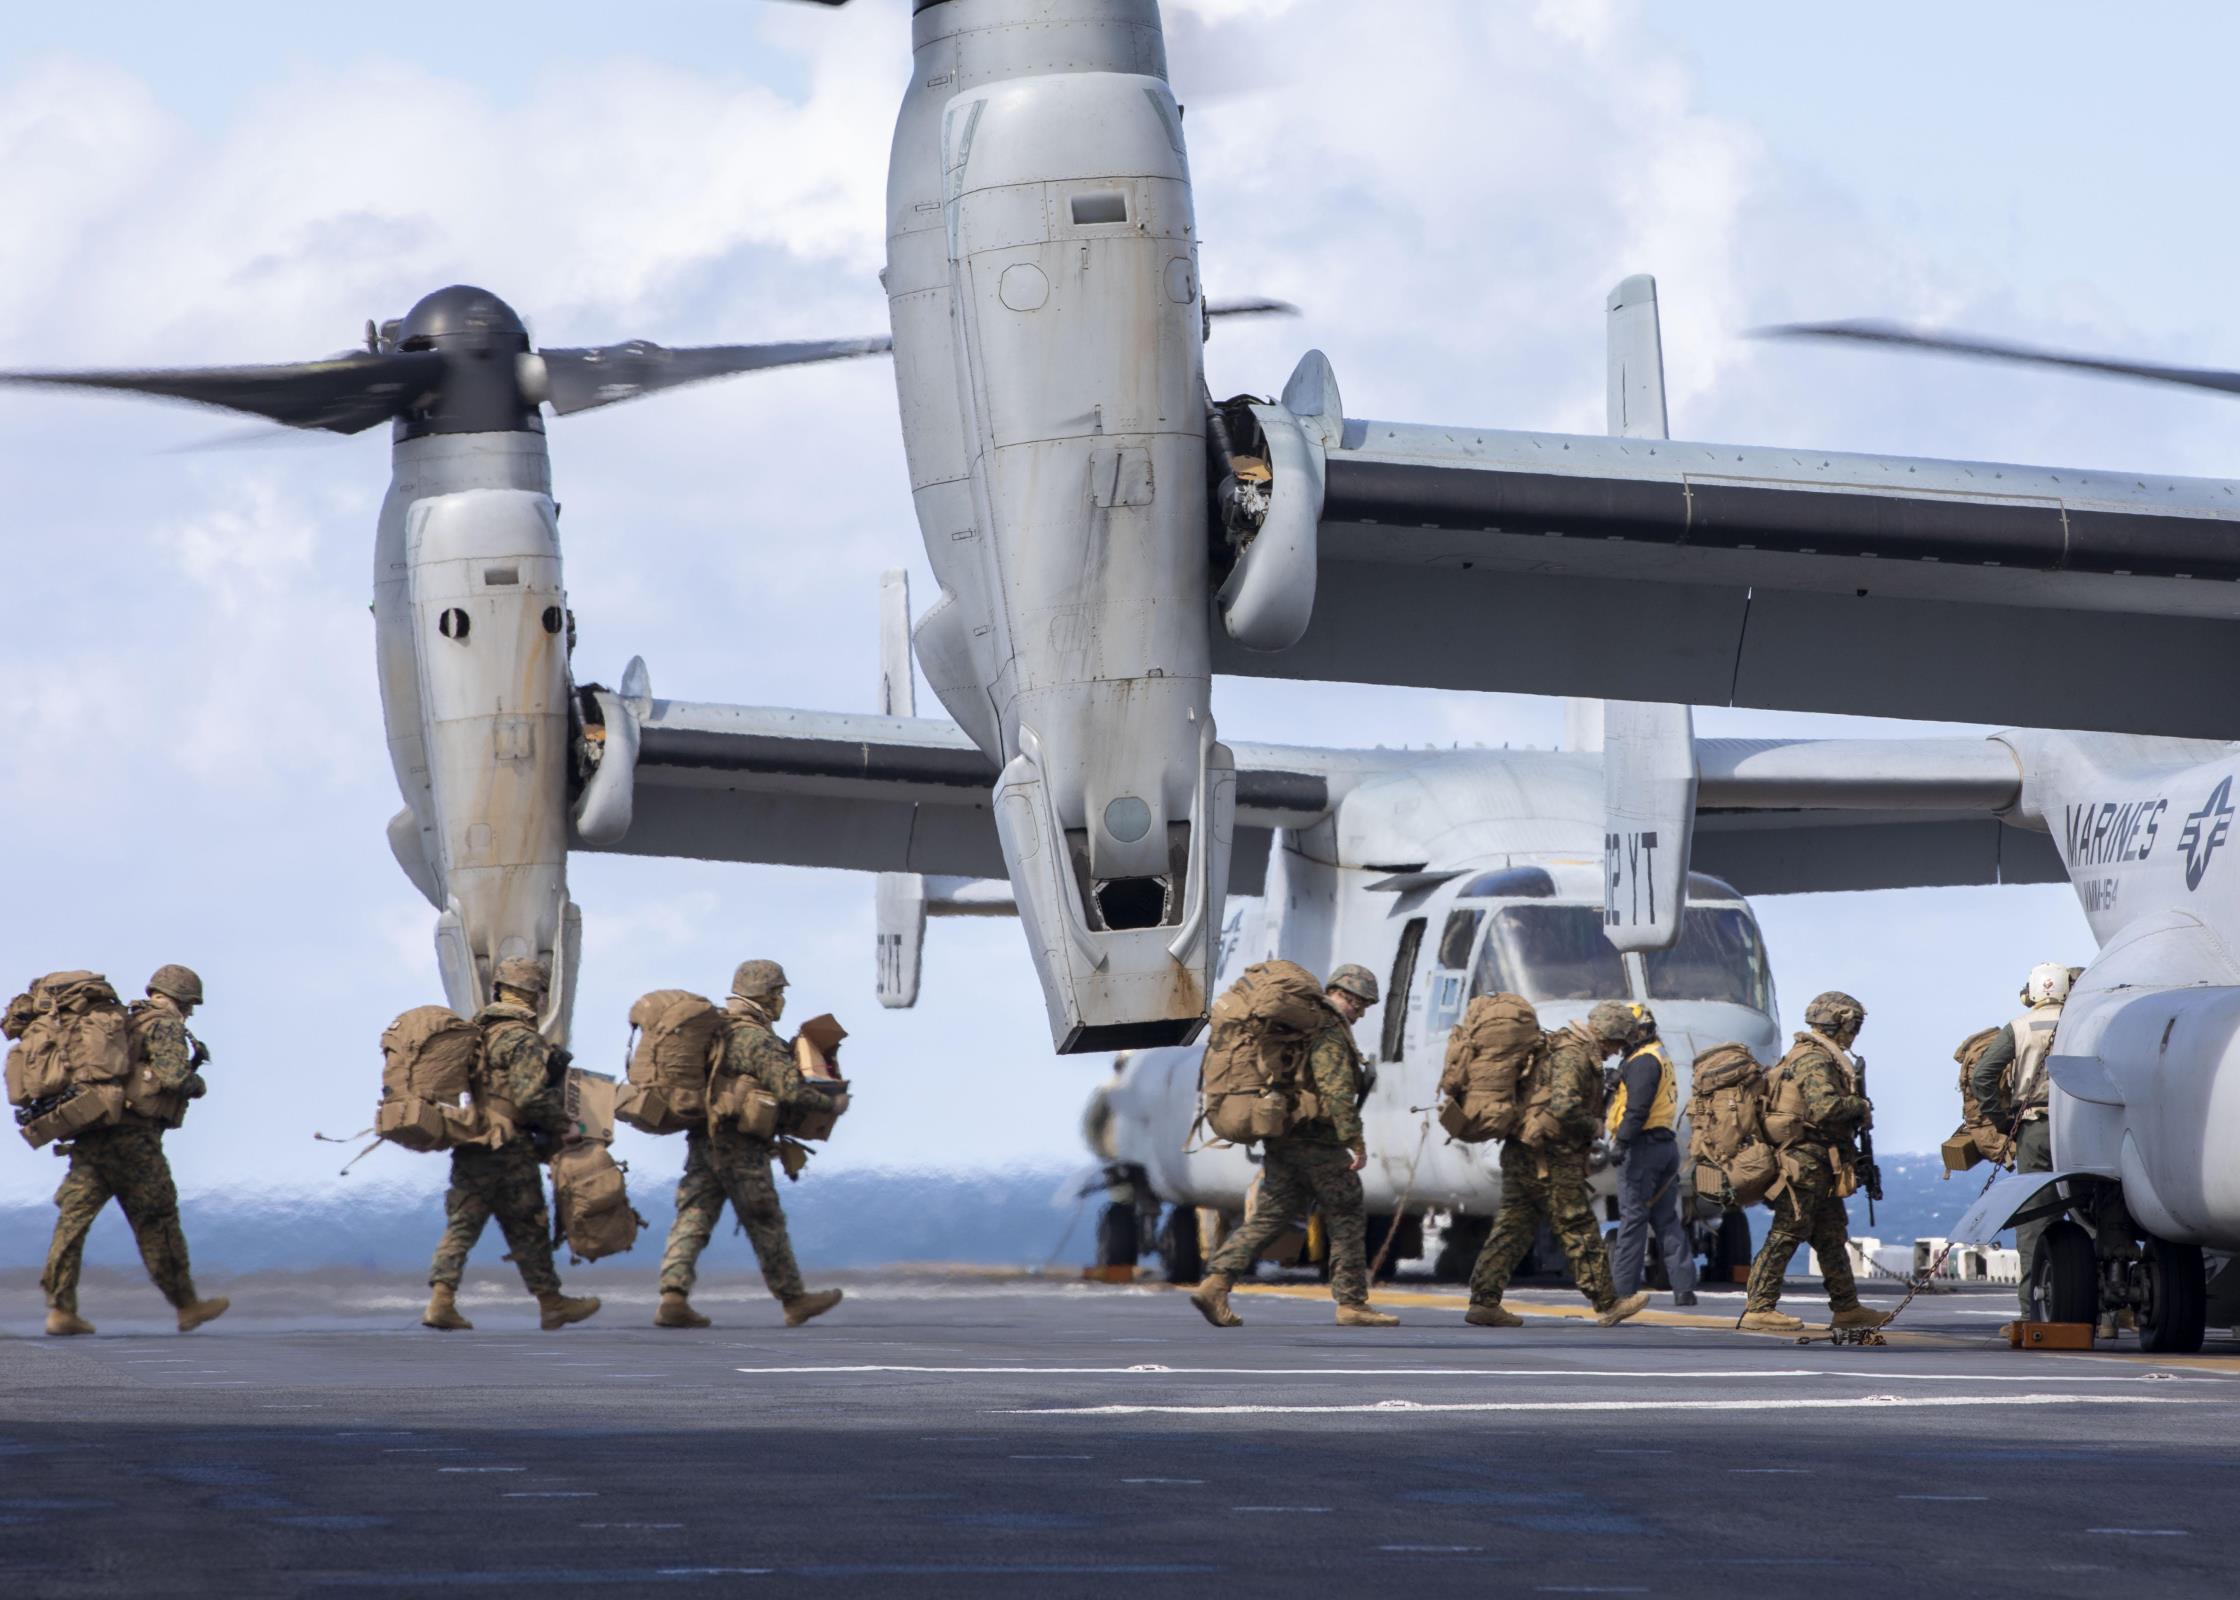 PACIFIC OCEAN (May 3, 2021) U.S. Marines assigned to the 15th Marine Expeditionary Unit board an MV-22 Osprey assigned to Marine Medium Tiltrotor Squadron 164 (Reinforced), 15th MEU, aboard the amphibious assault ship USS Makin Island (LHD 8) in the north Pacific Ocean during Northern Edge 2021. (U.S. Navy photo by Mass Communication Specialist 2nd Class Michael J. Lieberknecht) 210503-N-AO823-1008